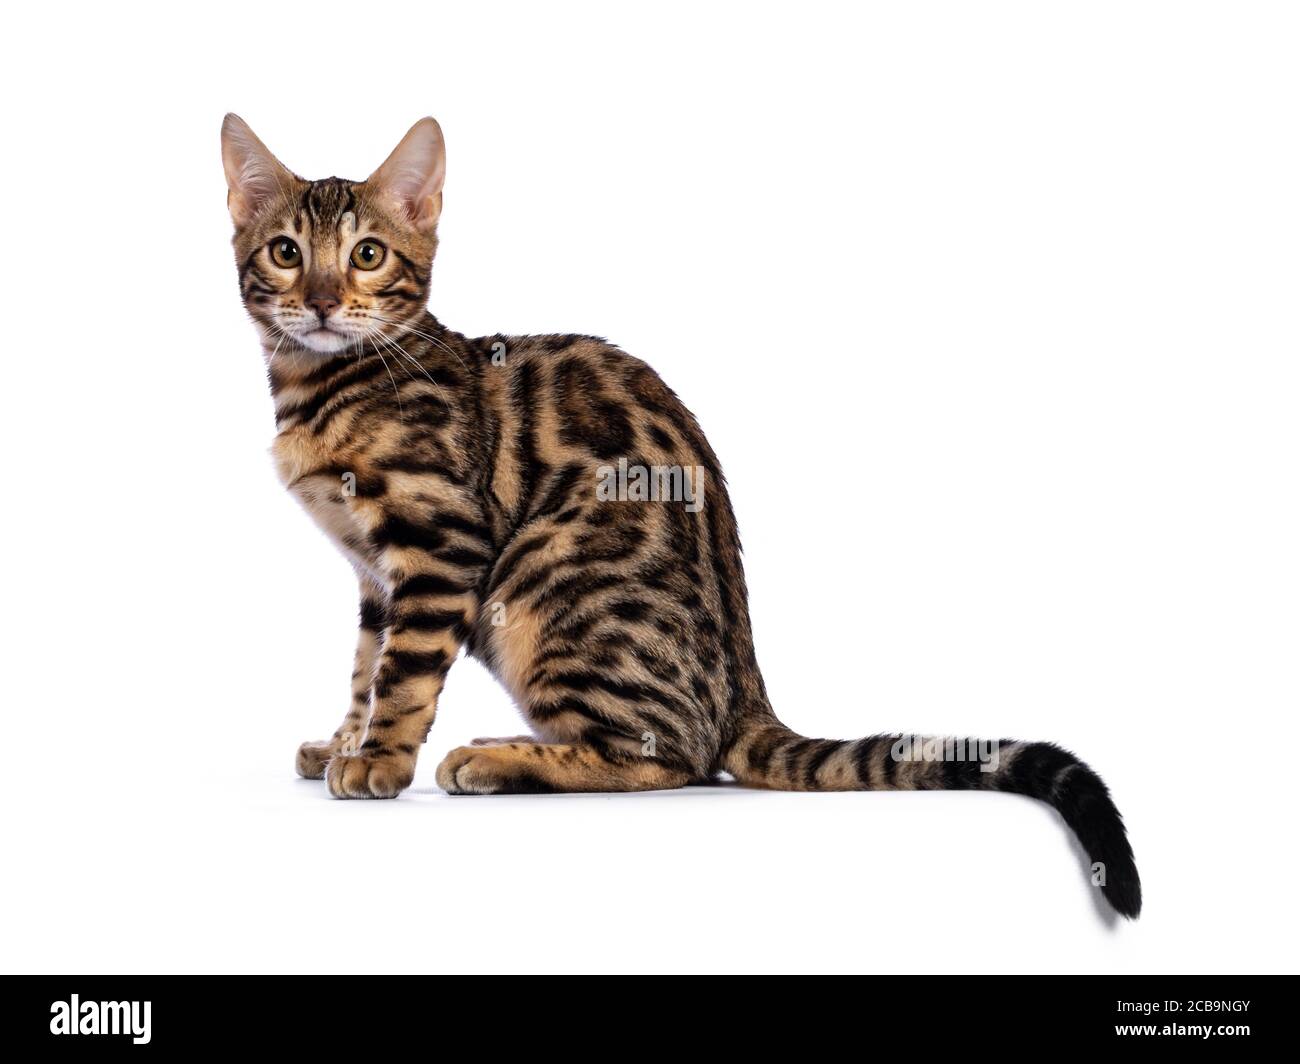 Young  bengal cat kitten, sitting side ways. Looking at camera with greenish eyes. Isolated on white background. Tail hanging over edge. Stock Photo